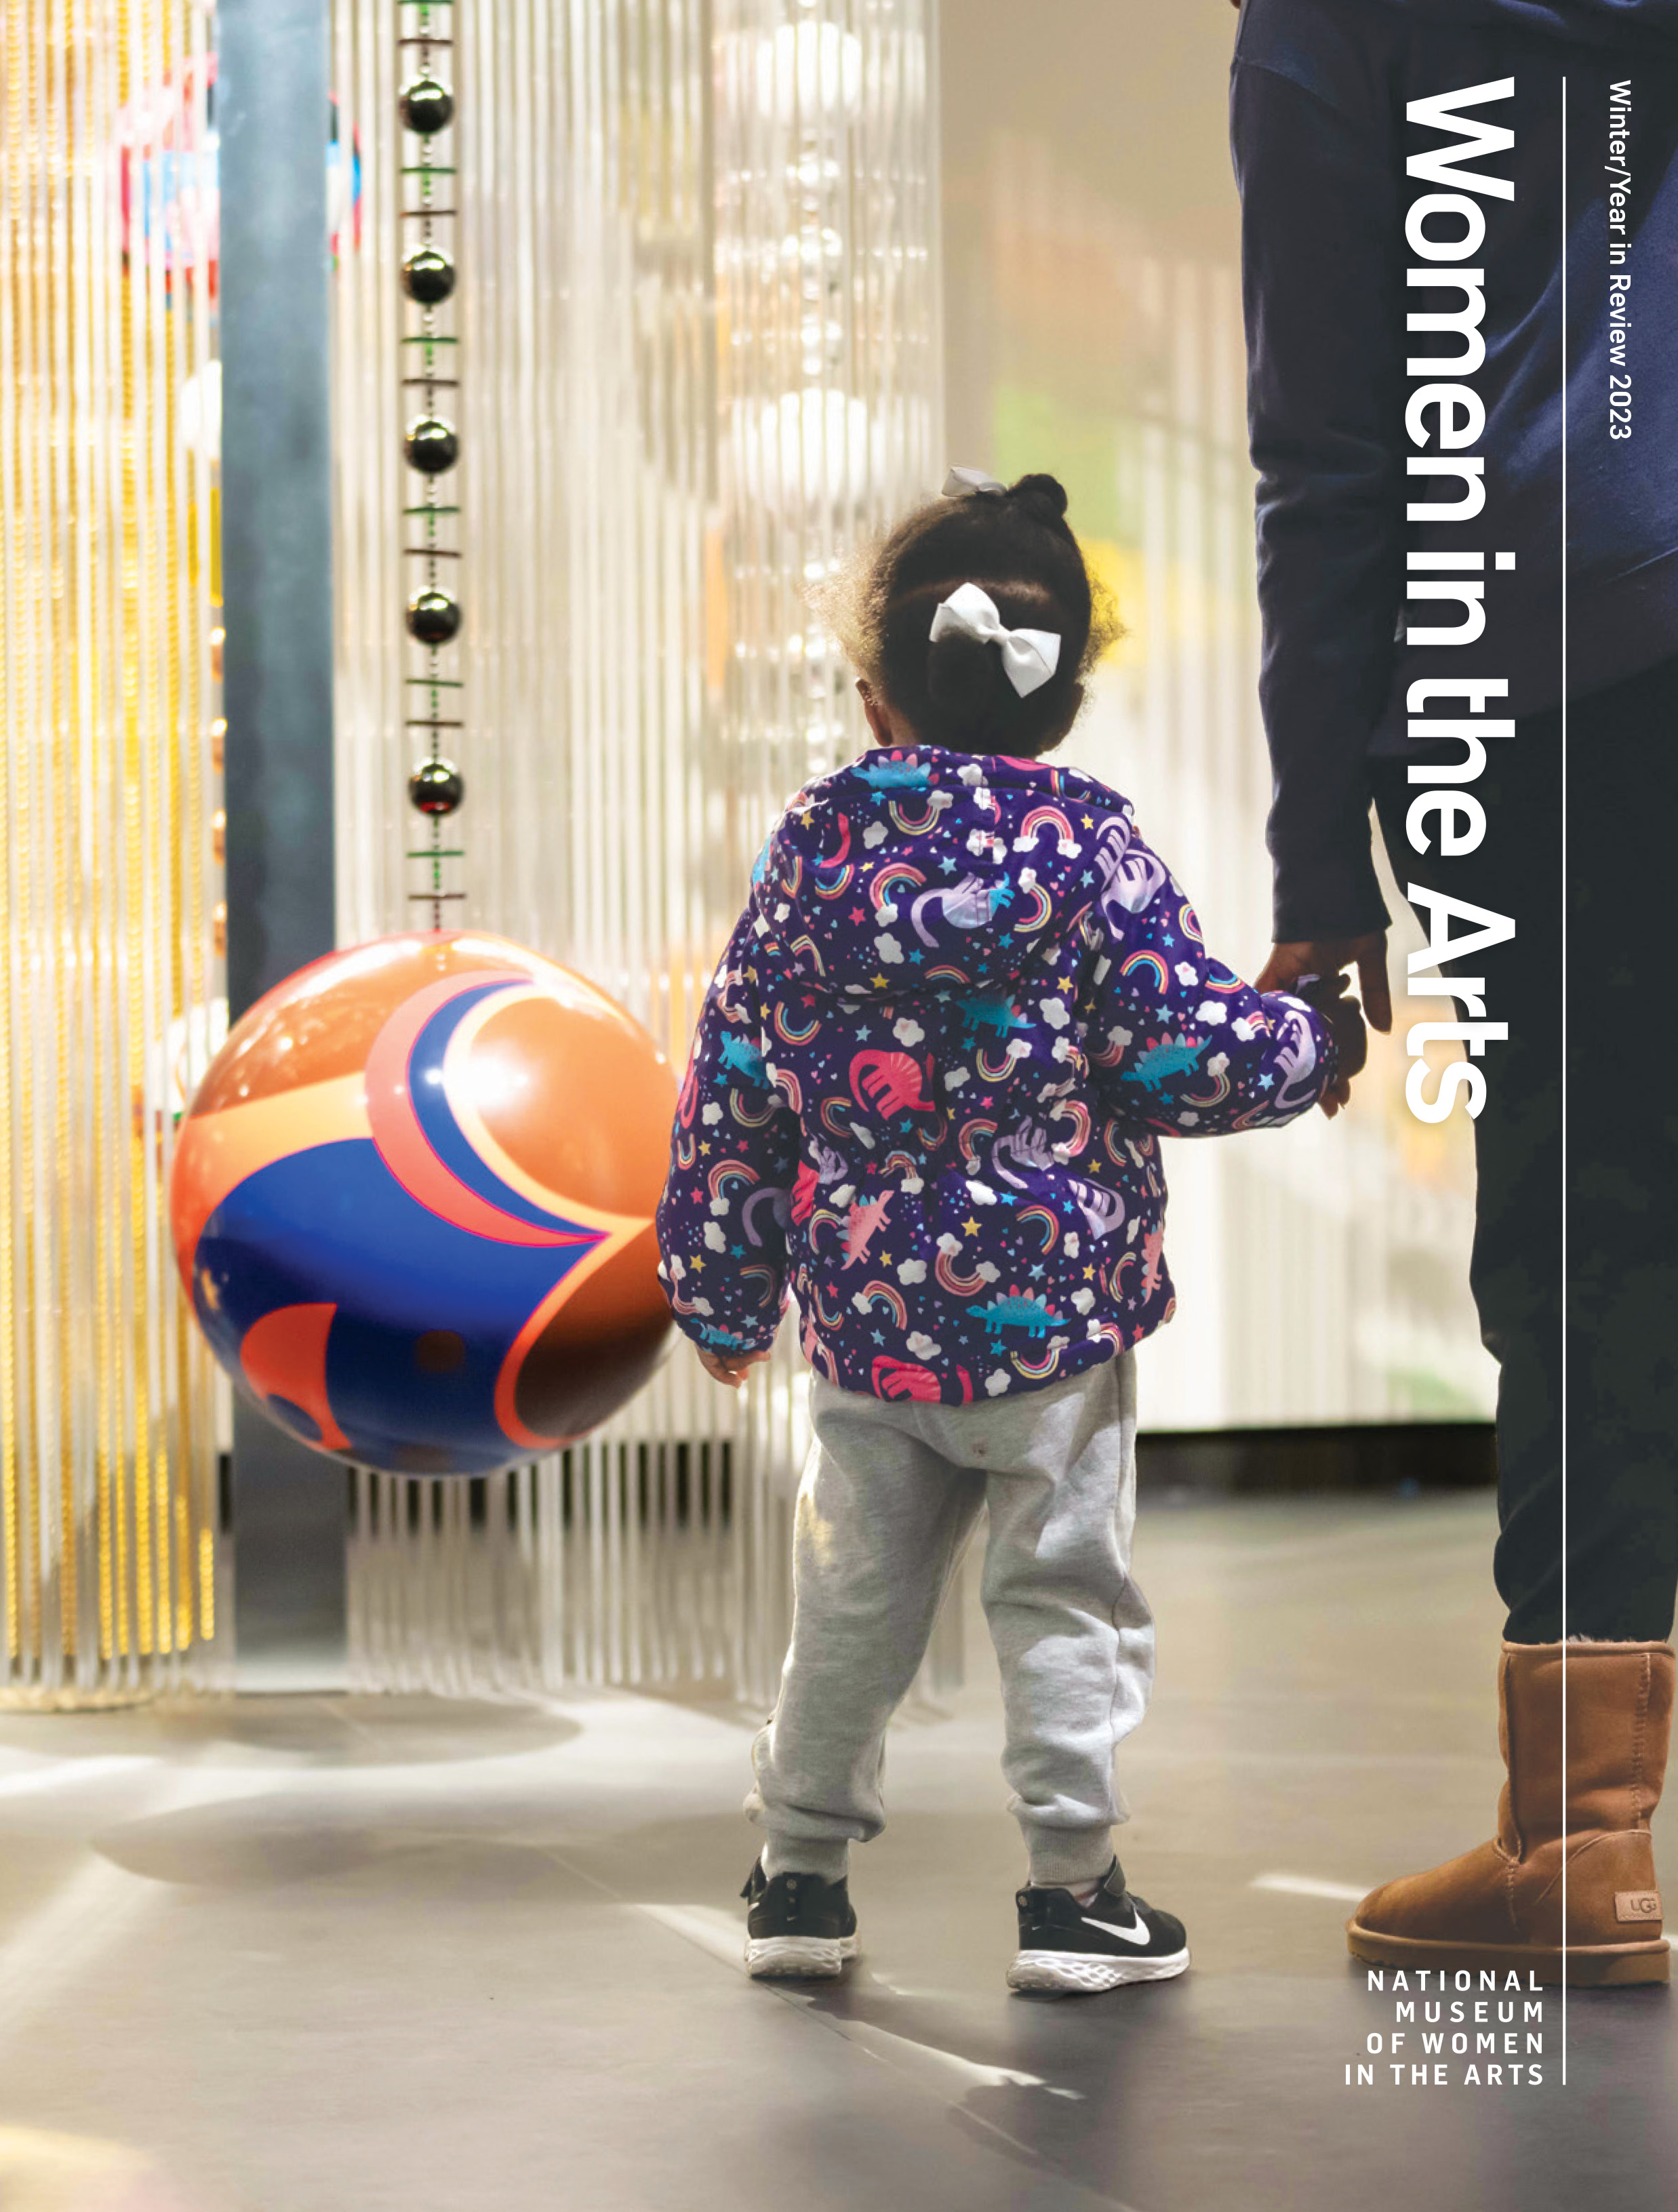 A magazine cover with a photograph of a medium-skinned child wearing a whimsical jacket and white bows in their hair, looking at a 3 dimensional sculpture with a large colorful ball suspended above the floor and long strands of beads hanging around it.